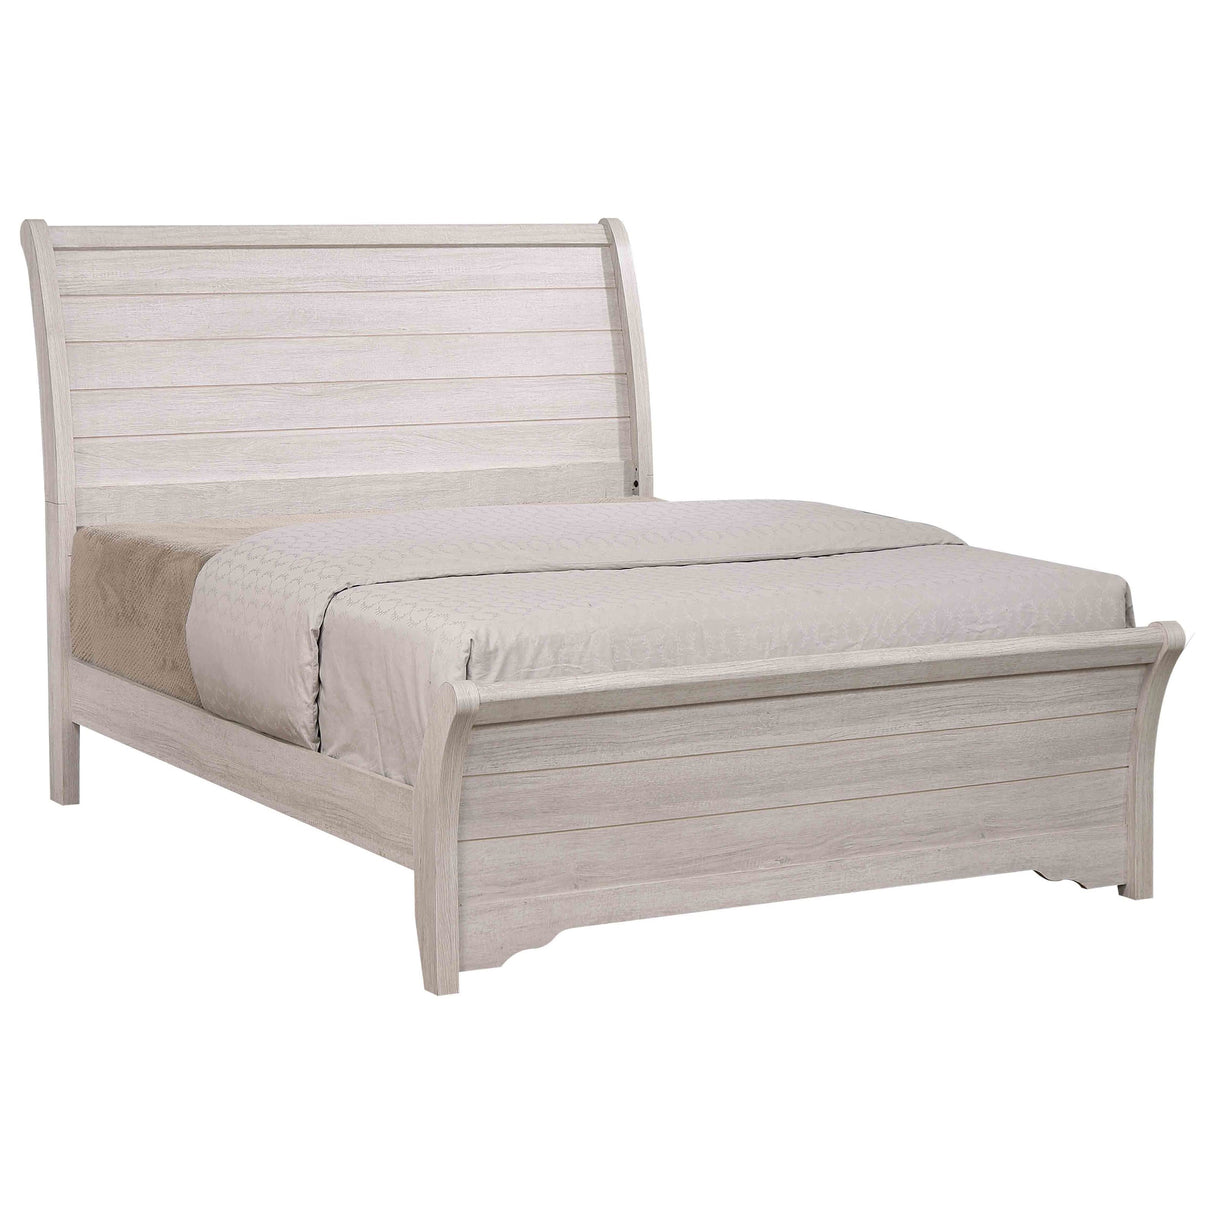 Coralee White Queen Sleigh Bed